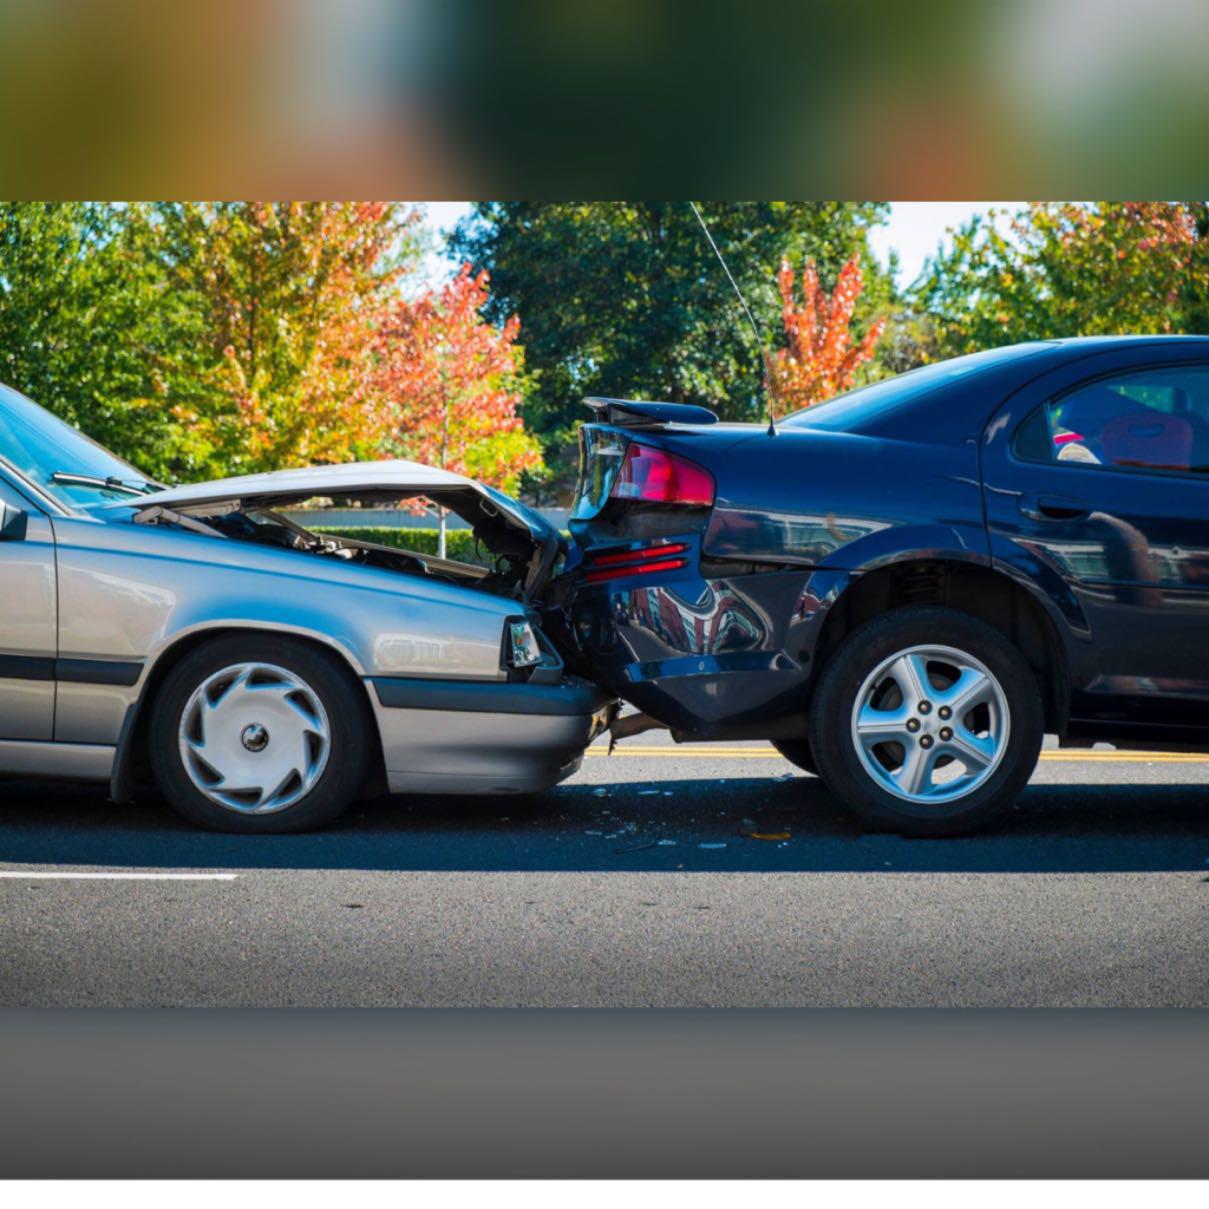 A fender bender can end up costing lots of money! Make sure your auto insurance is up to date!